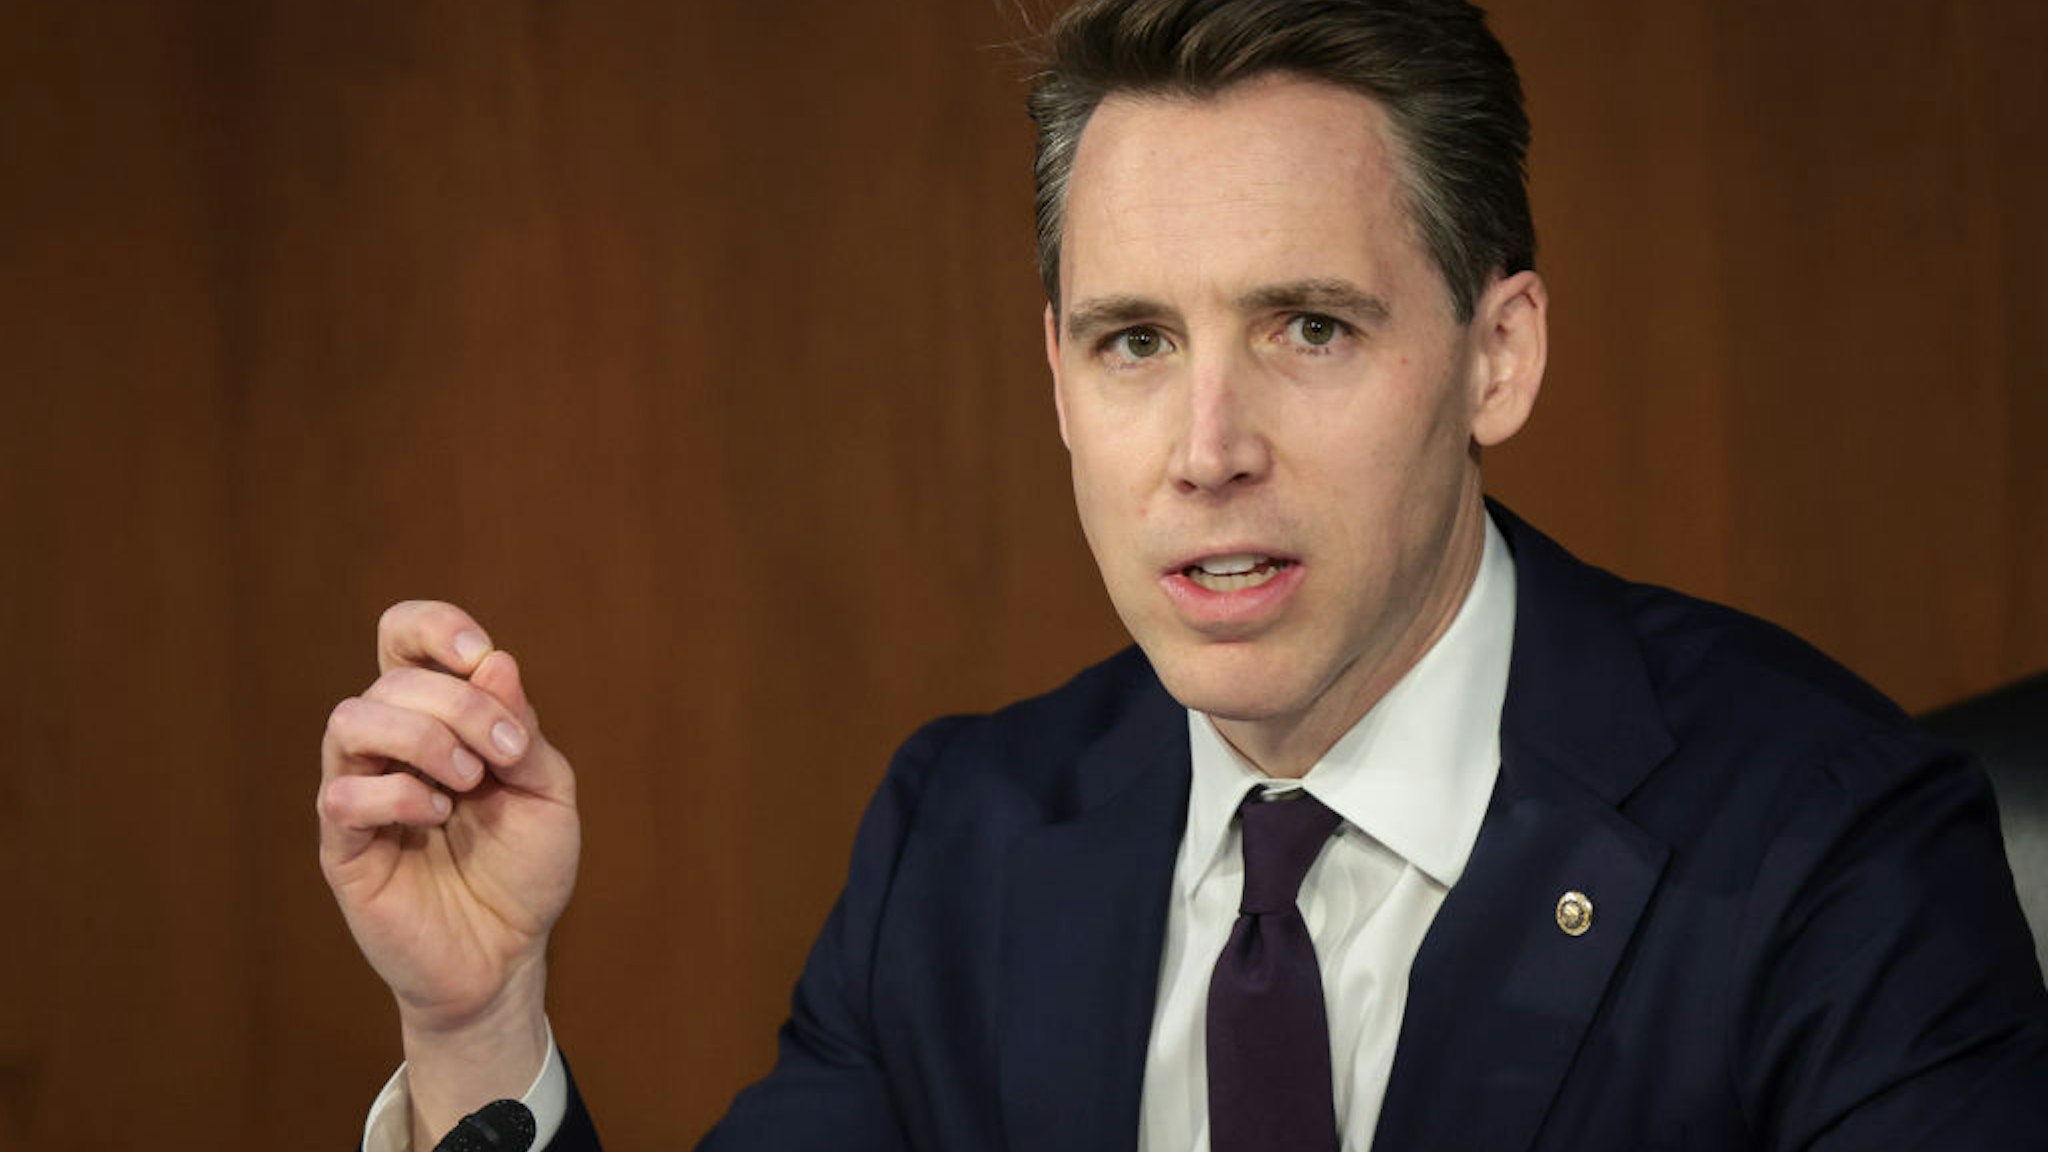 WASHINGTON, DC - APRIL 4: Sen. Josh Hawley (R-MO) speaks during a Senate Judiciary Committee business meeting to vote on Supreme Court nominee Judge Ketanji Brown Jackson on Capitol Hill, April 4, 2022 in Washington, DC. A confirmation vote from the full Senate will come later this week. (Photo by Win McNamee/Getty Images).